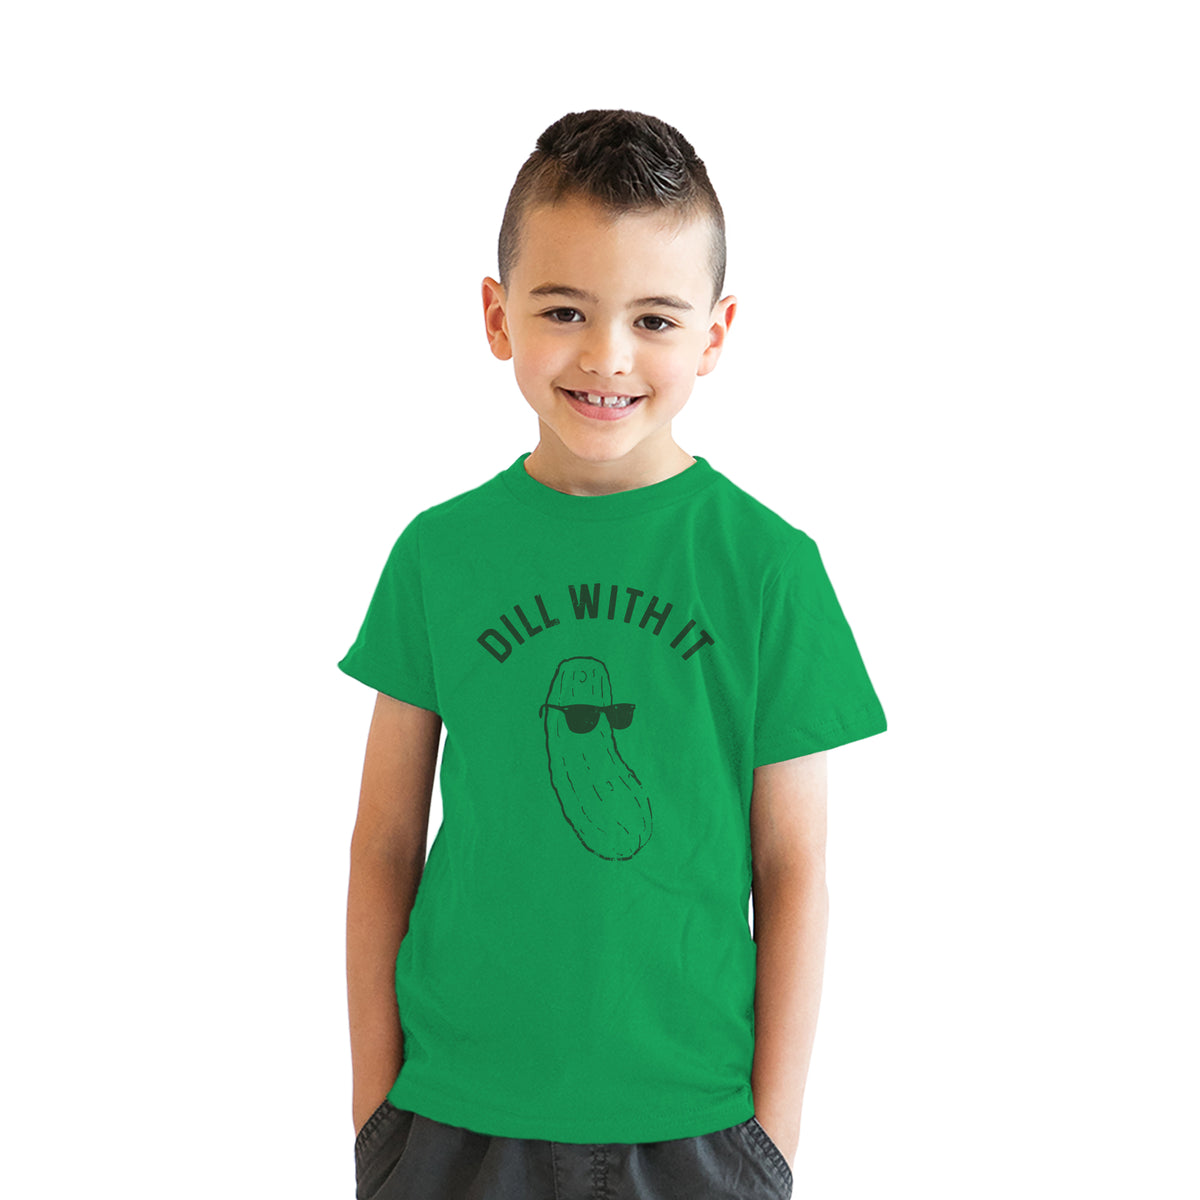 Dill With It Youth T Shirt